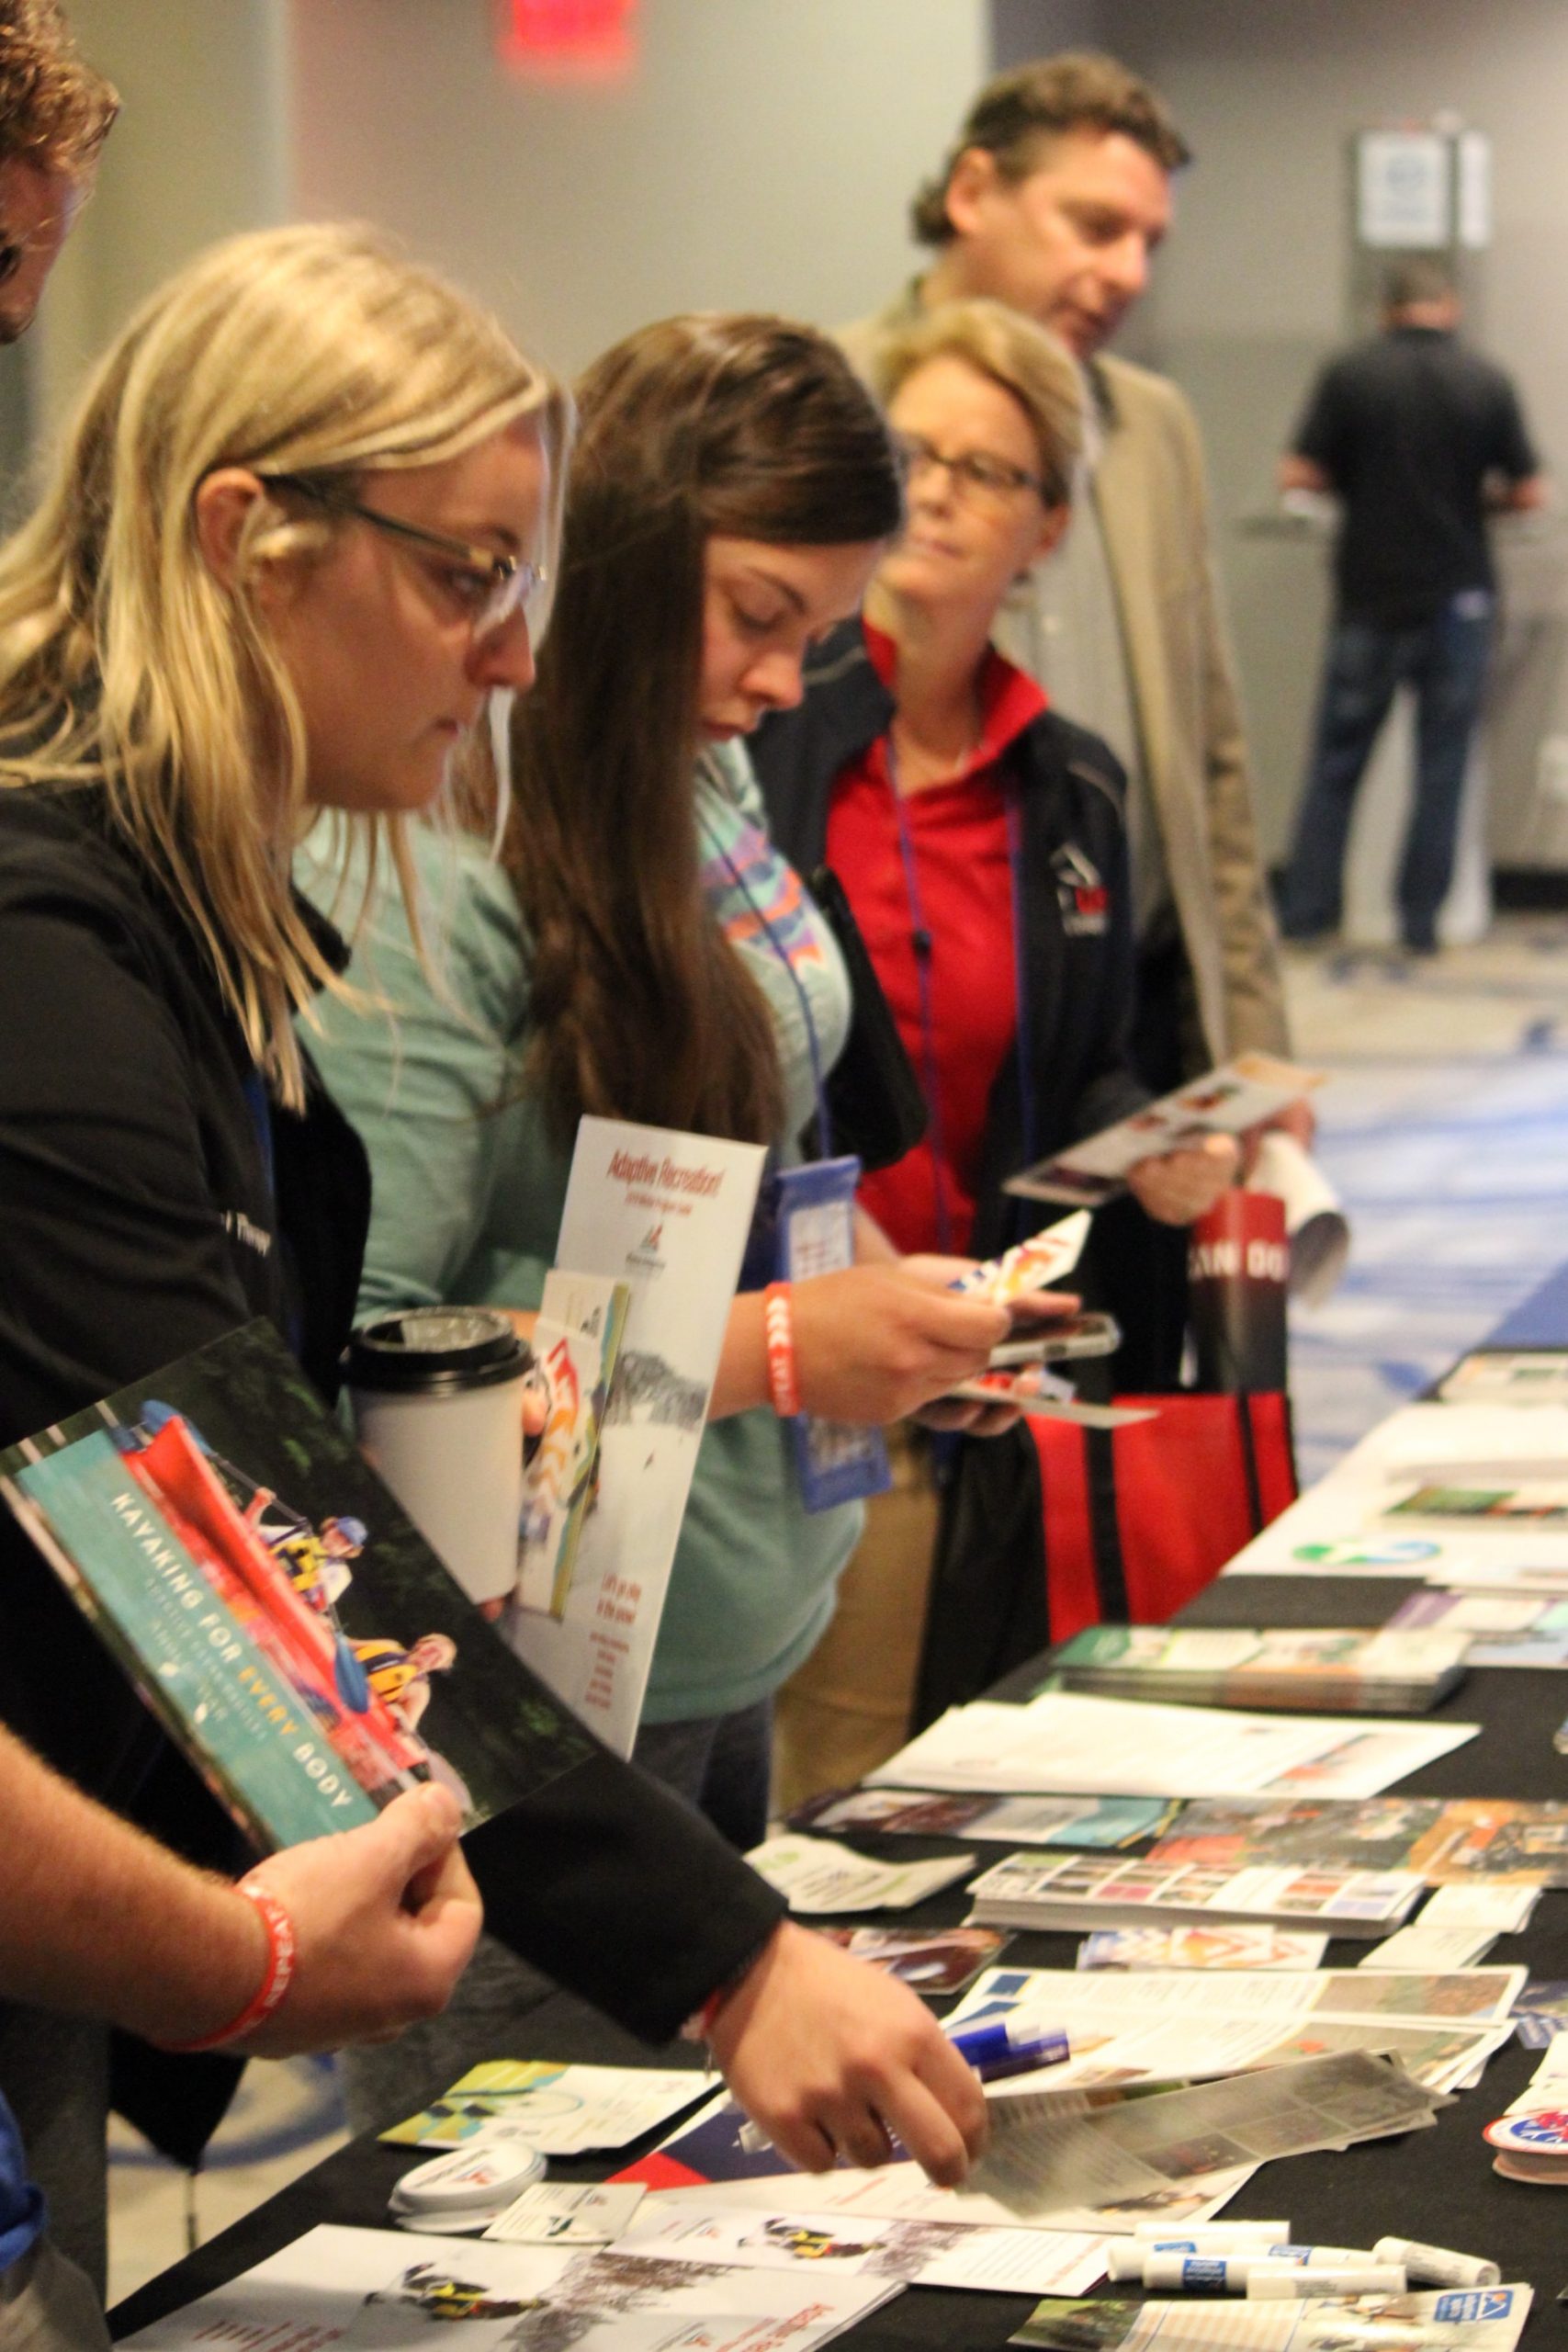 3 women standing in front of a a table with brochures and pamphlets